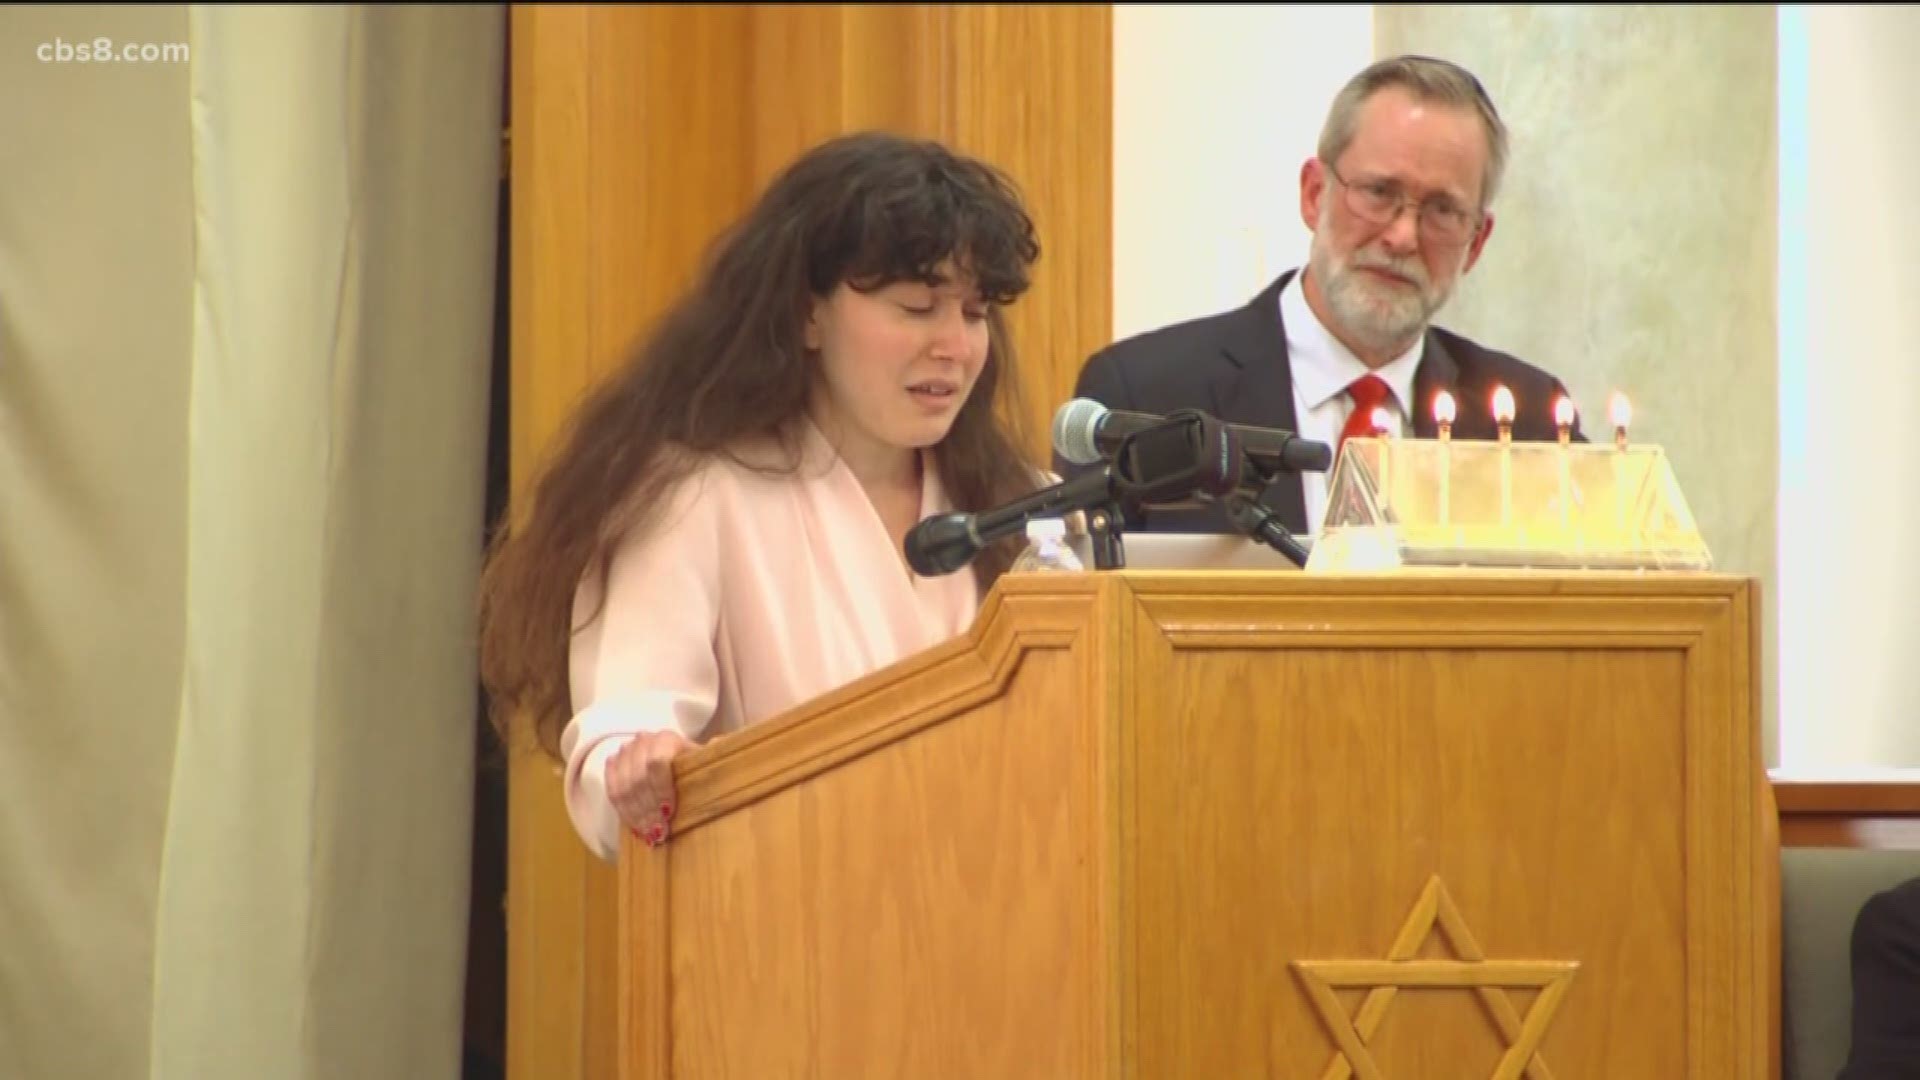 Kaye, 60, was described by Rabbi Yisroel Goldstein on Sunday as one of Congregation Chabad's "pioneers."